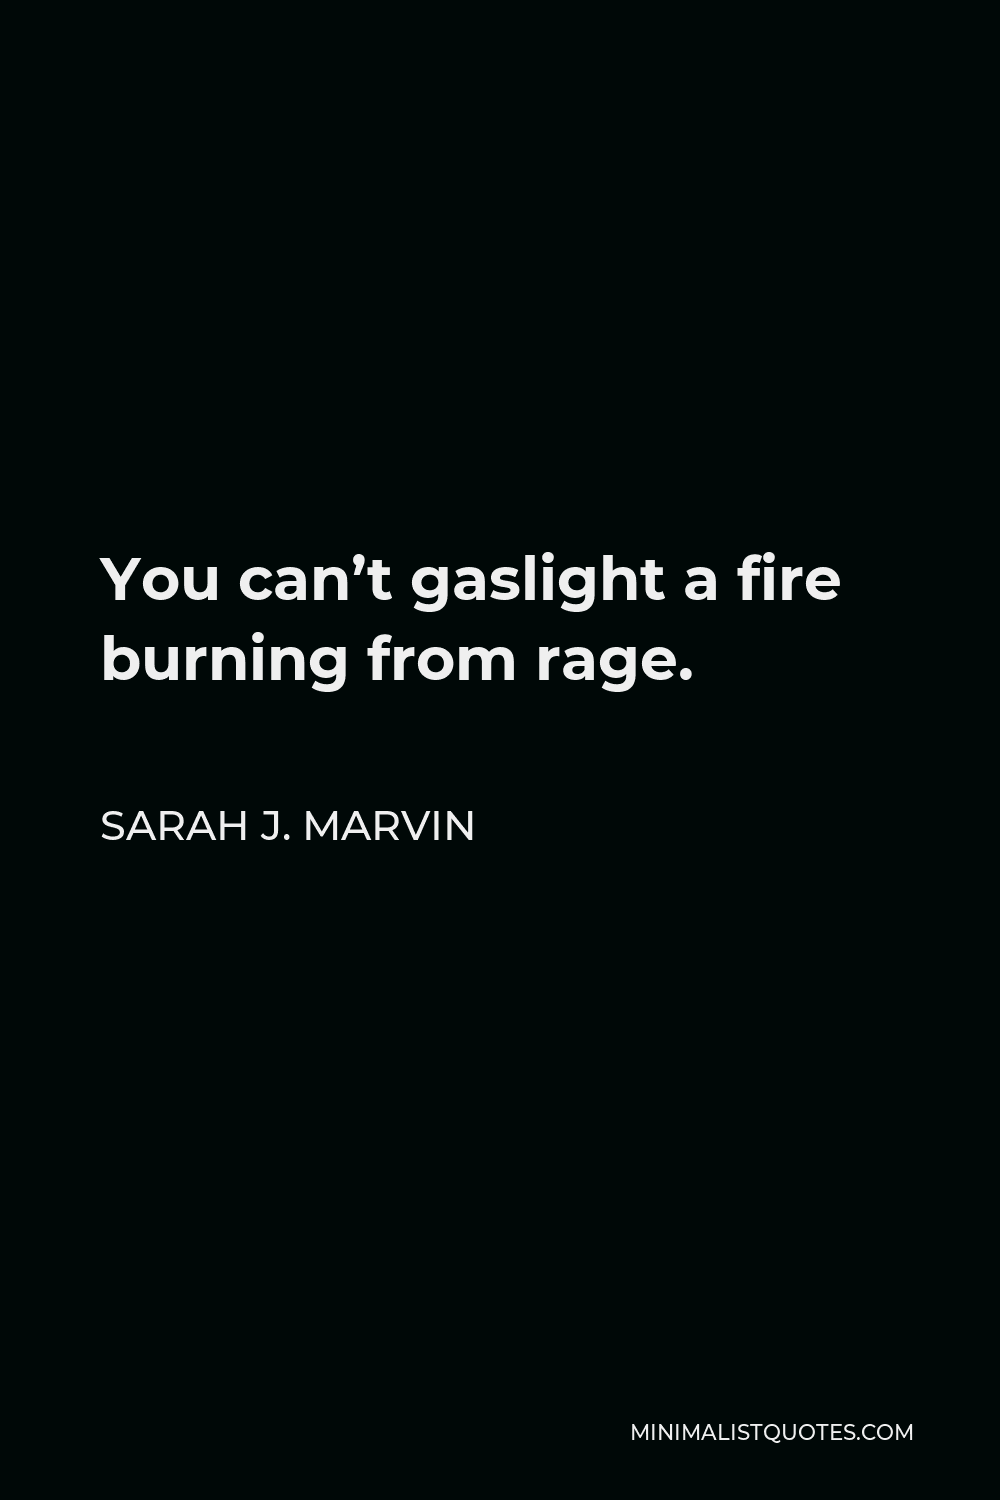 Sarah J. Marvin Quote - You can’t gaslight a fire burning from rage.